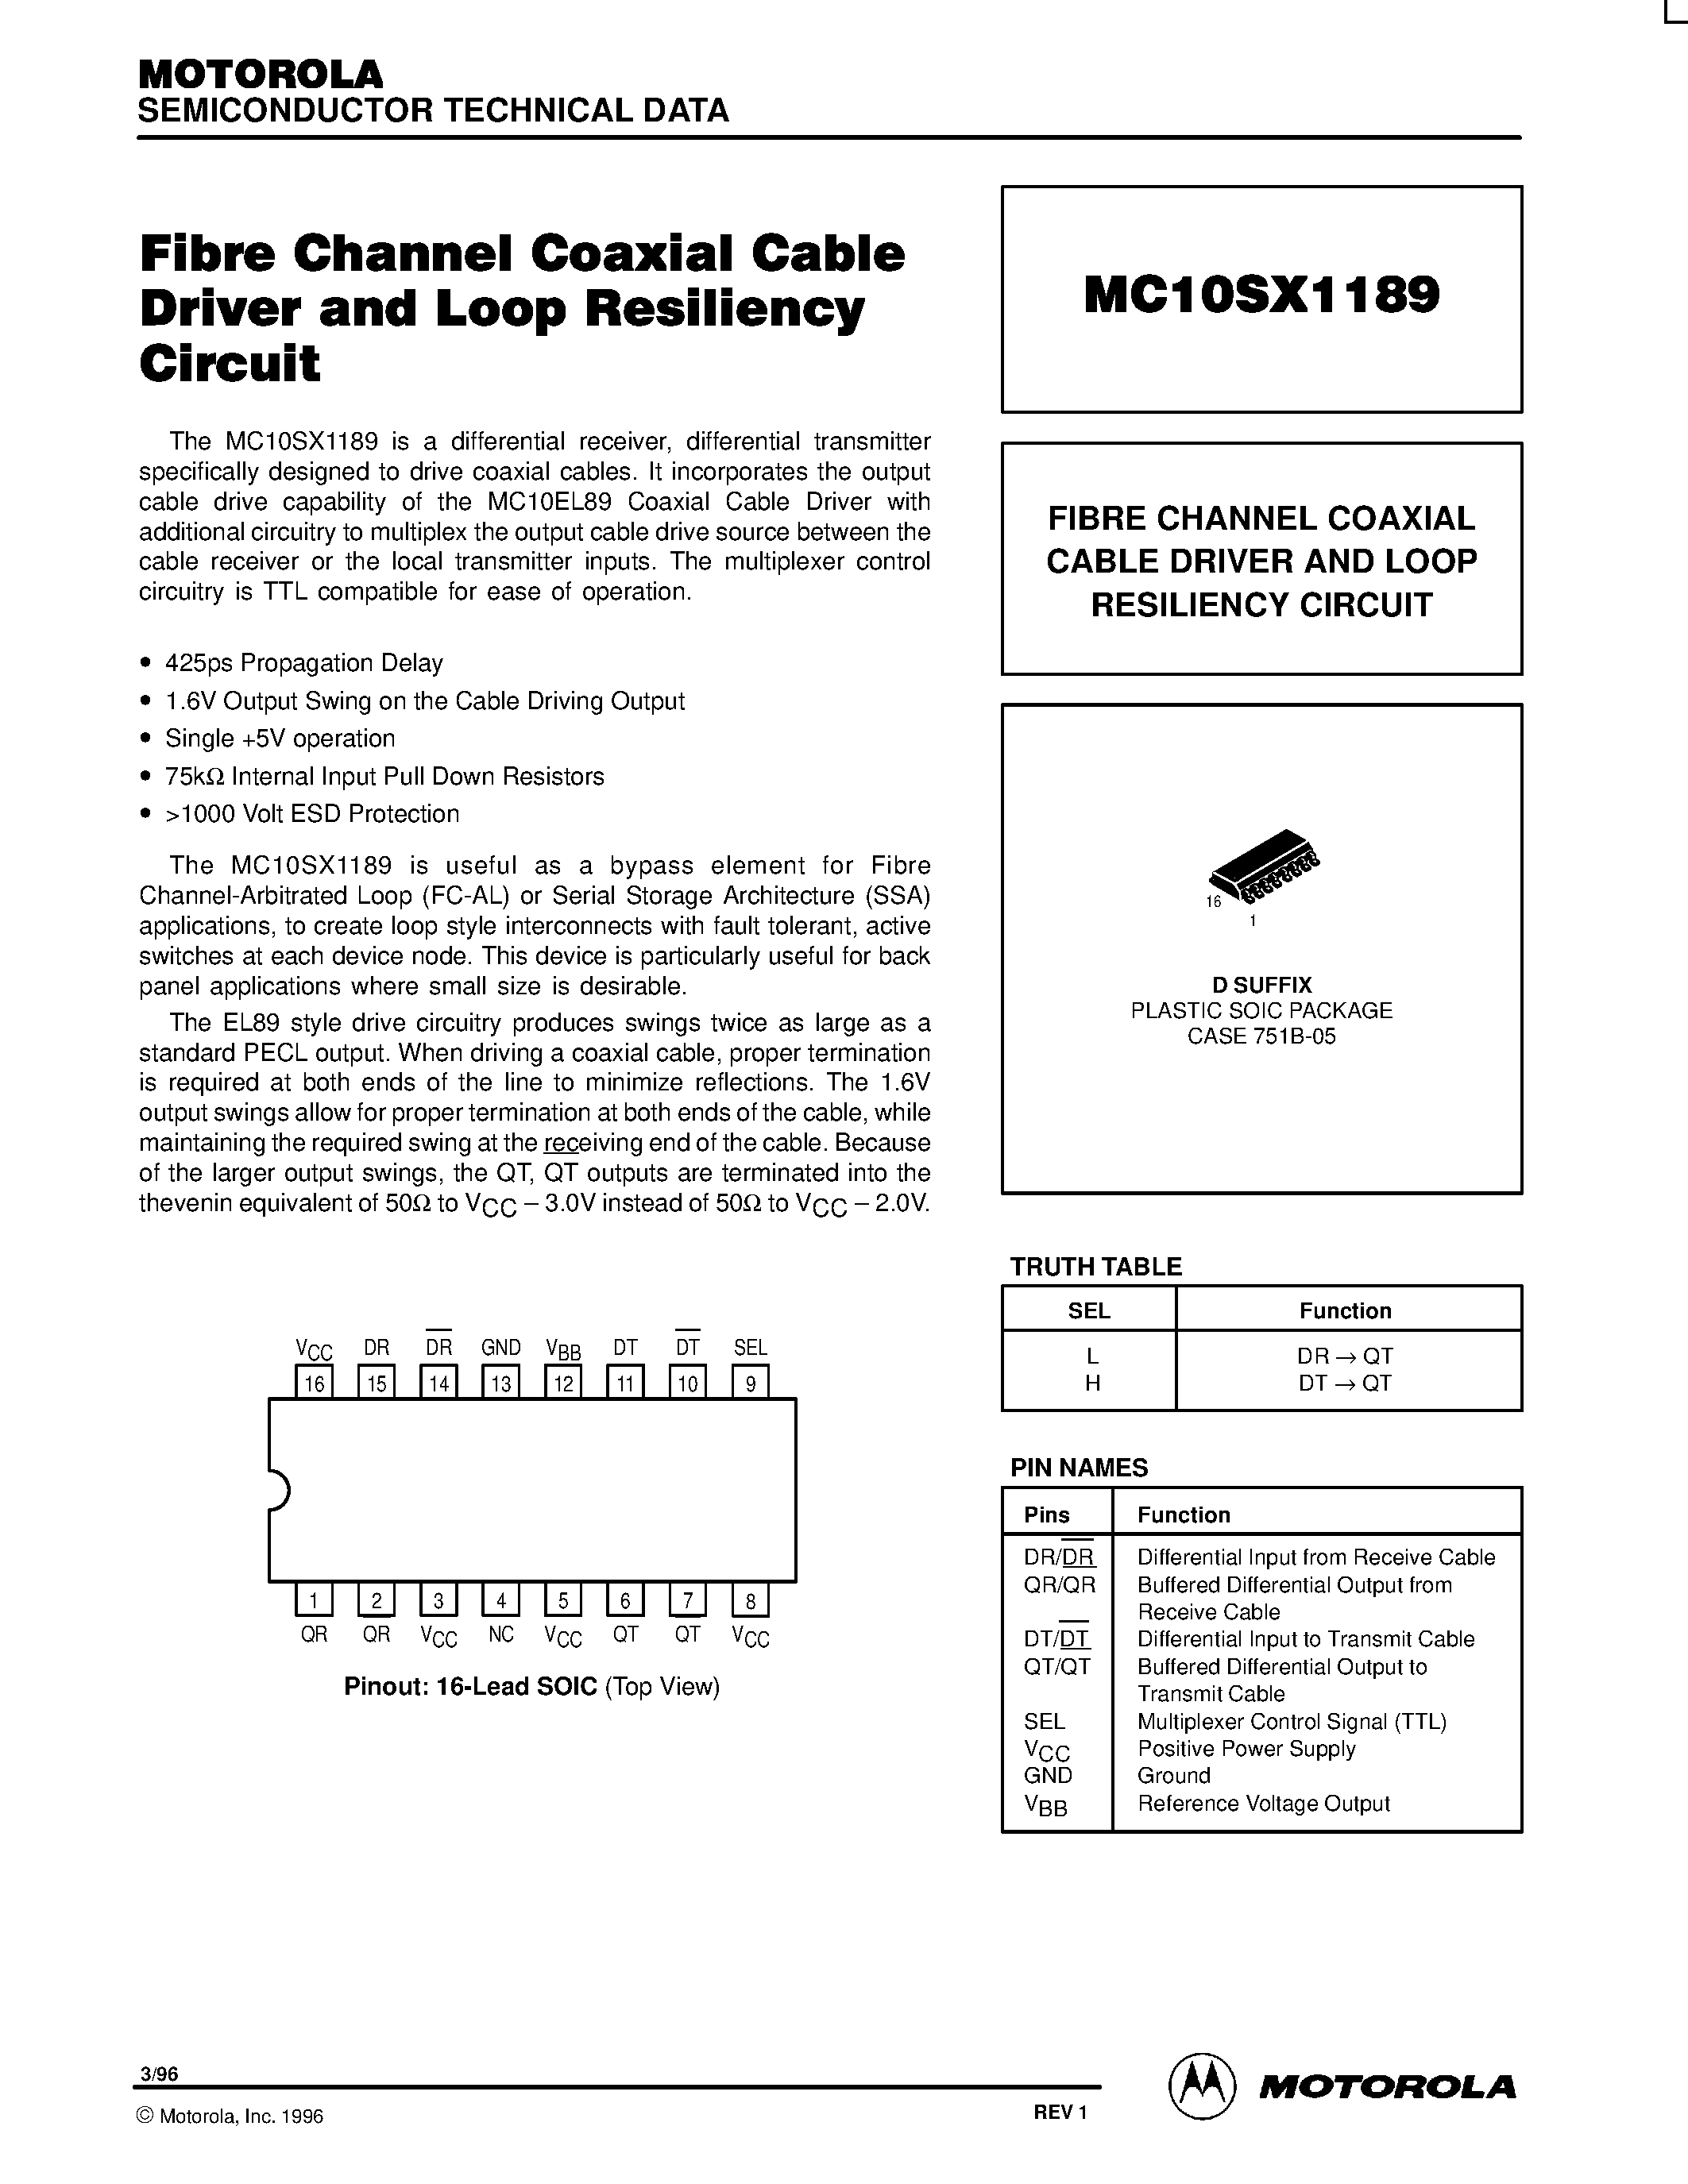 Datasheet MC10SX1189D - FIBRE CHANNEL COAXIAL CABLE DRIVER AND LOOP RESILIENCY CIRCUIT page 1